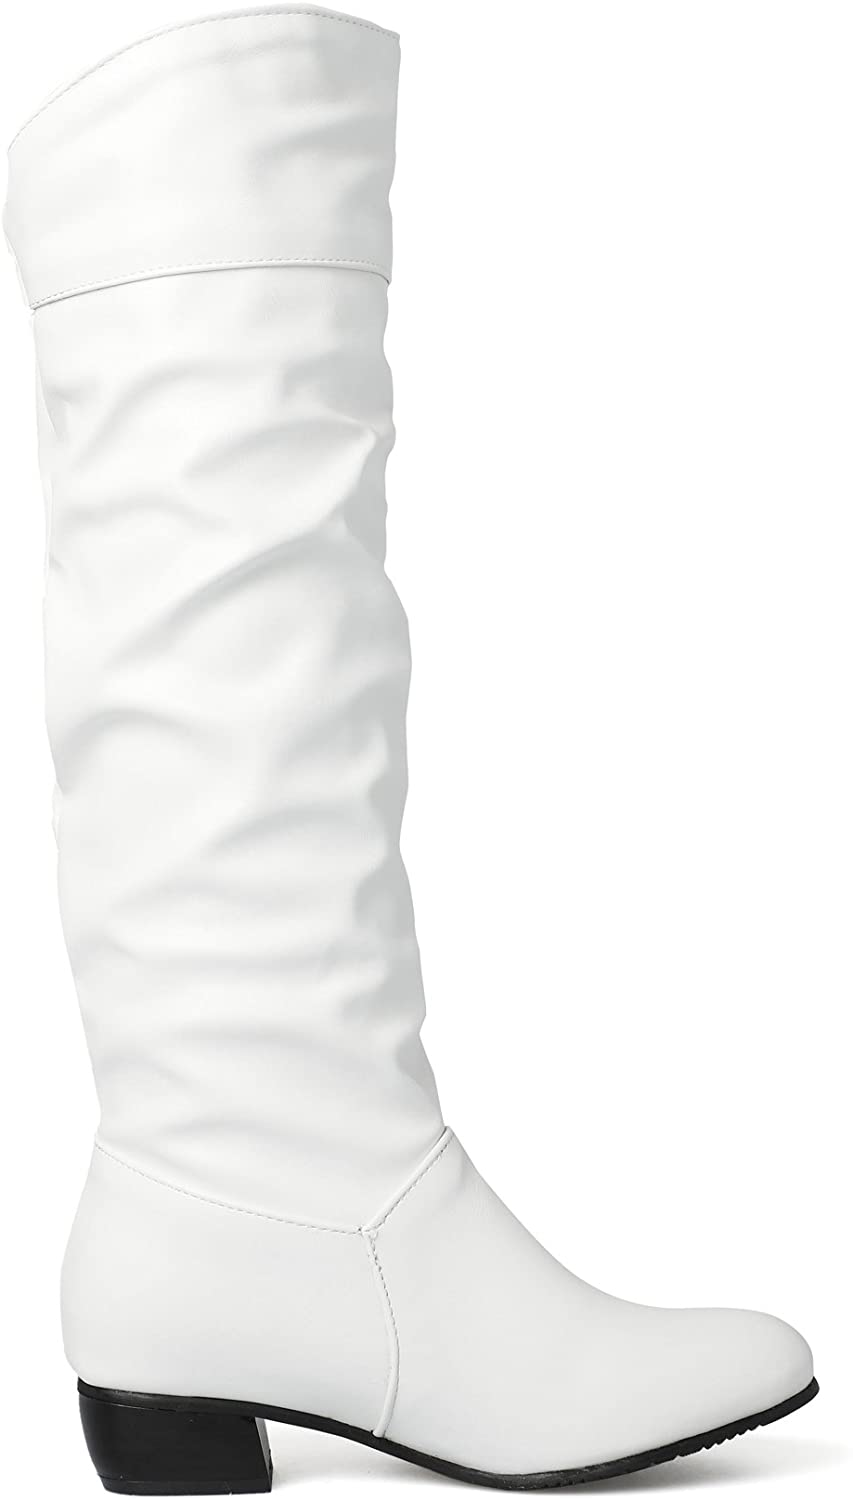 Sungtin Women's Faux Leather Knee High Flat Slouch Boots, White, Size 6 ...